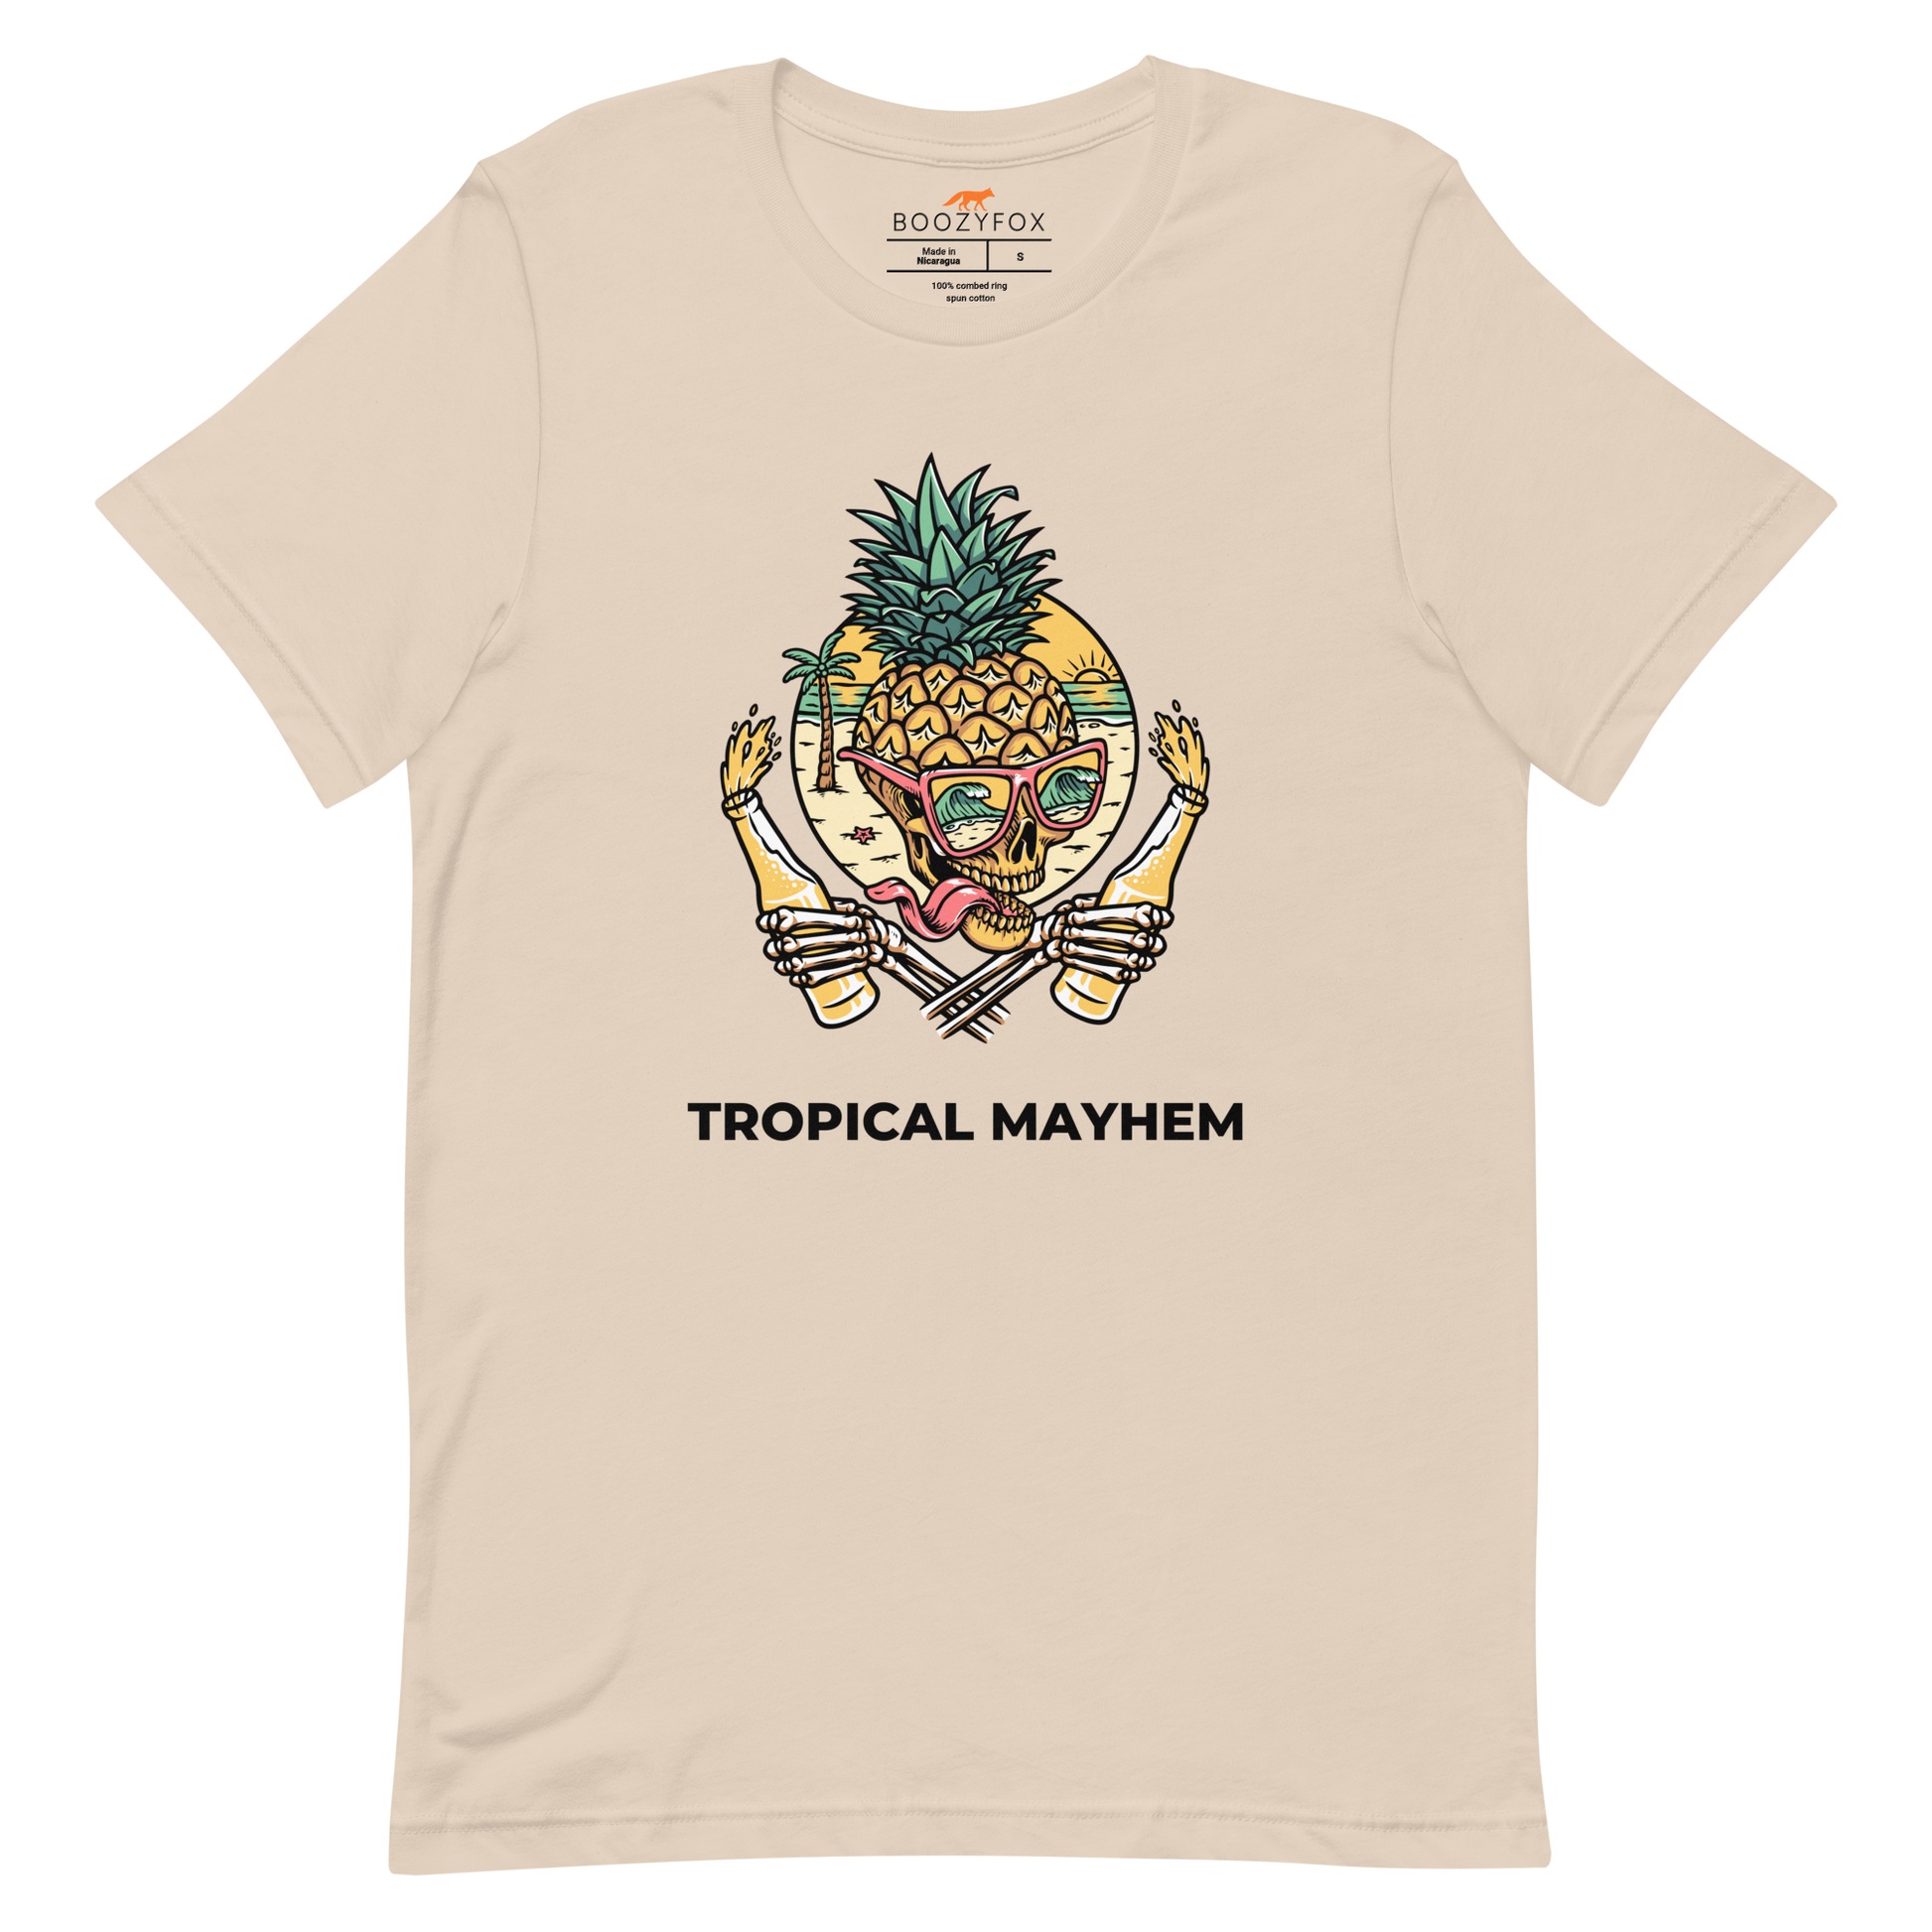 Soft Cream Premium Tropical Mayhem Tee featuring a Crazy Pineapple Skull graphic on the chest - Funny Graphic Pineapple Tees - Boozy Fox